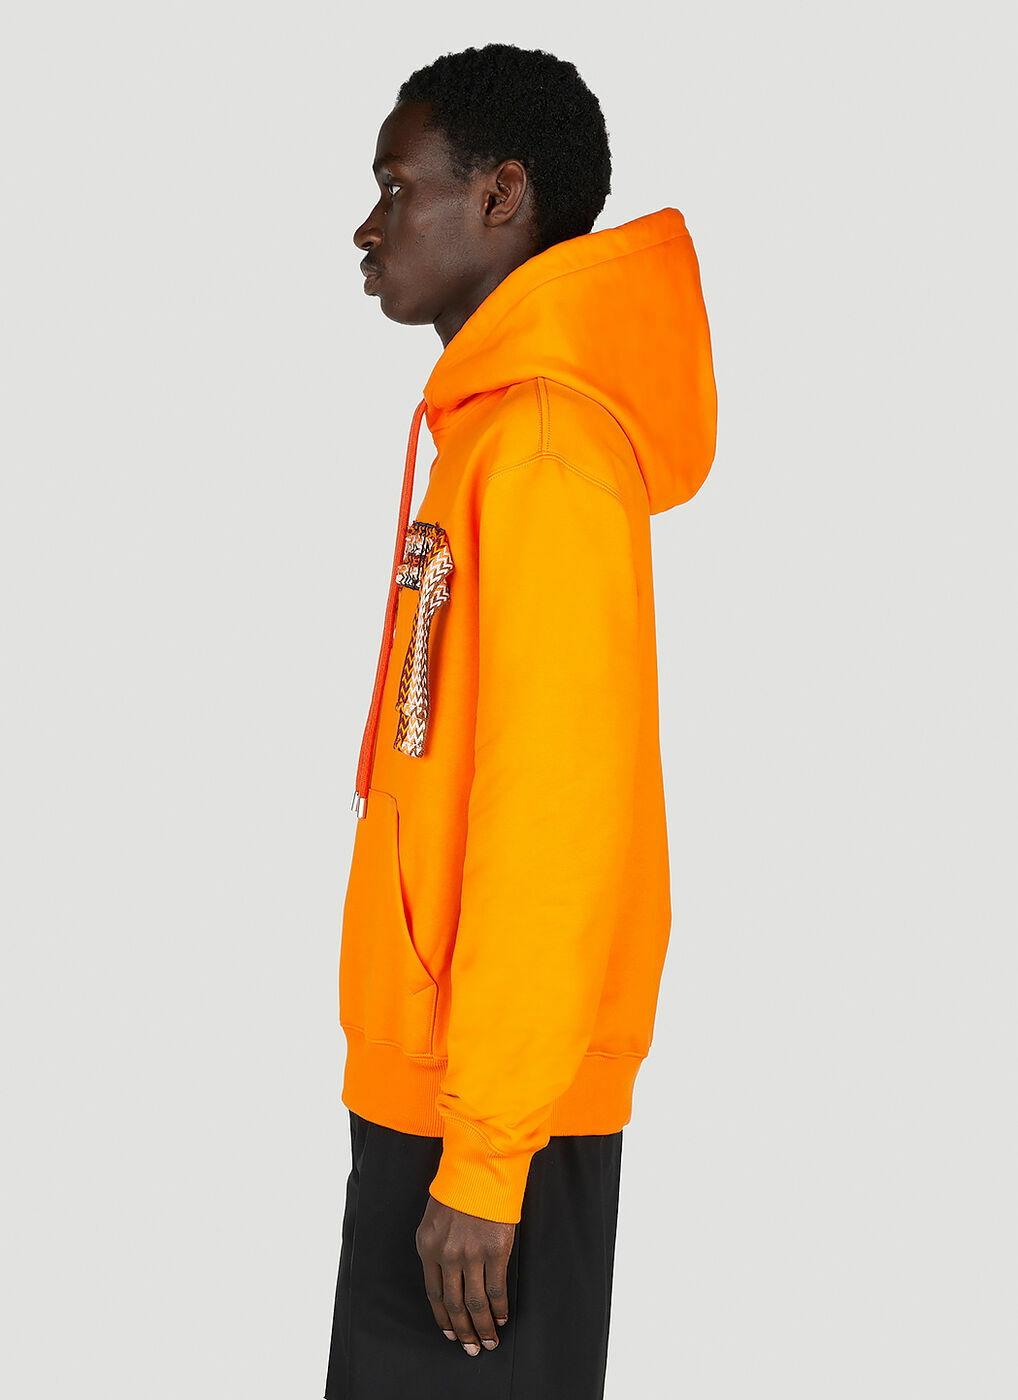 Lanvin - Curb Lace Embroidered Hooded Sweatshirt in Orange Lanvin